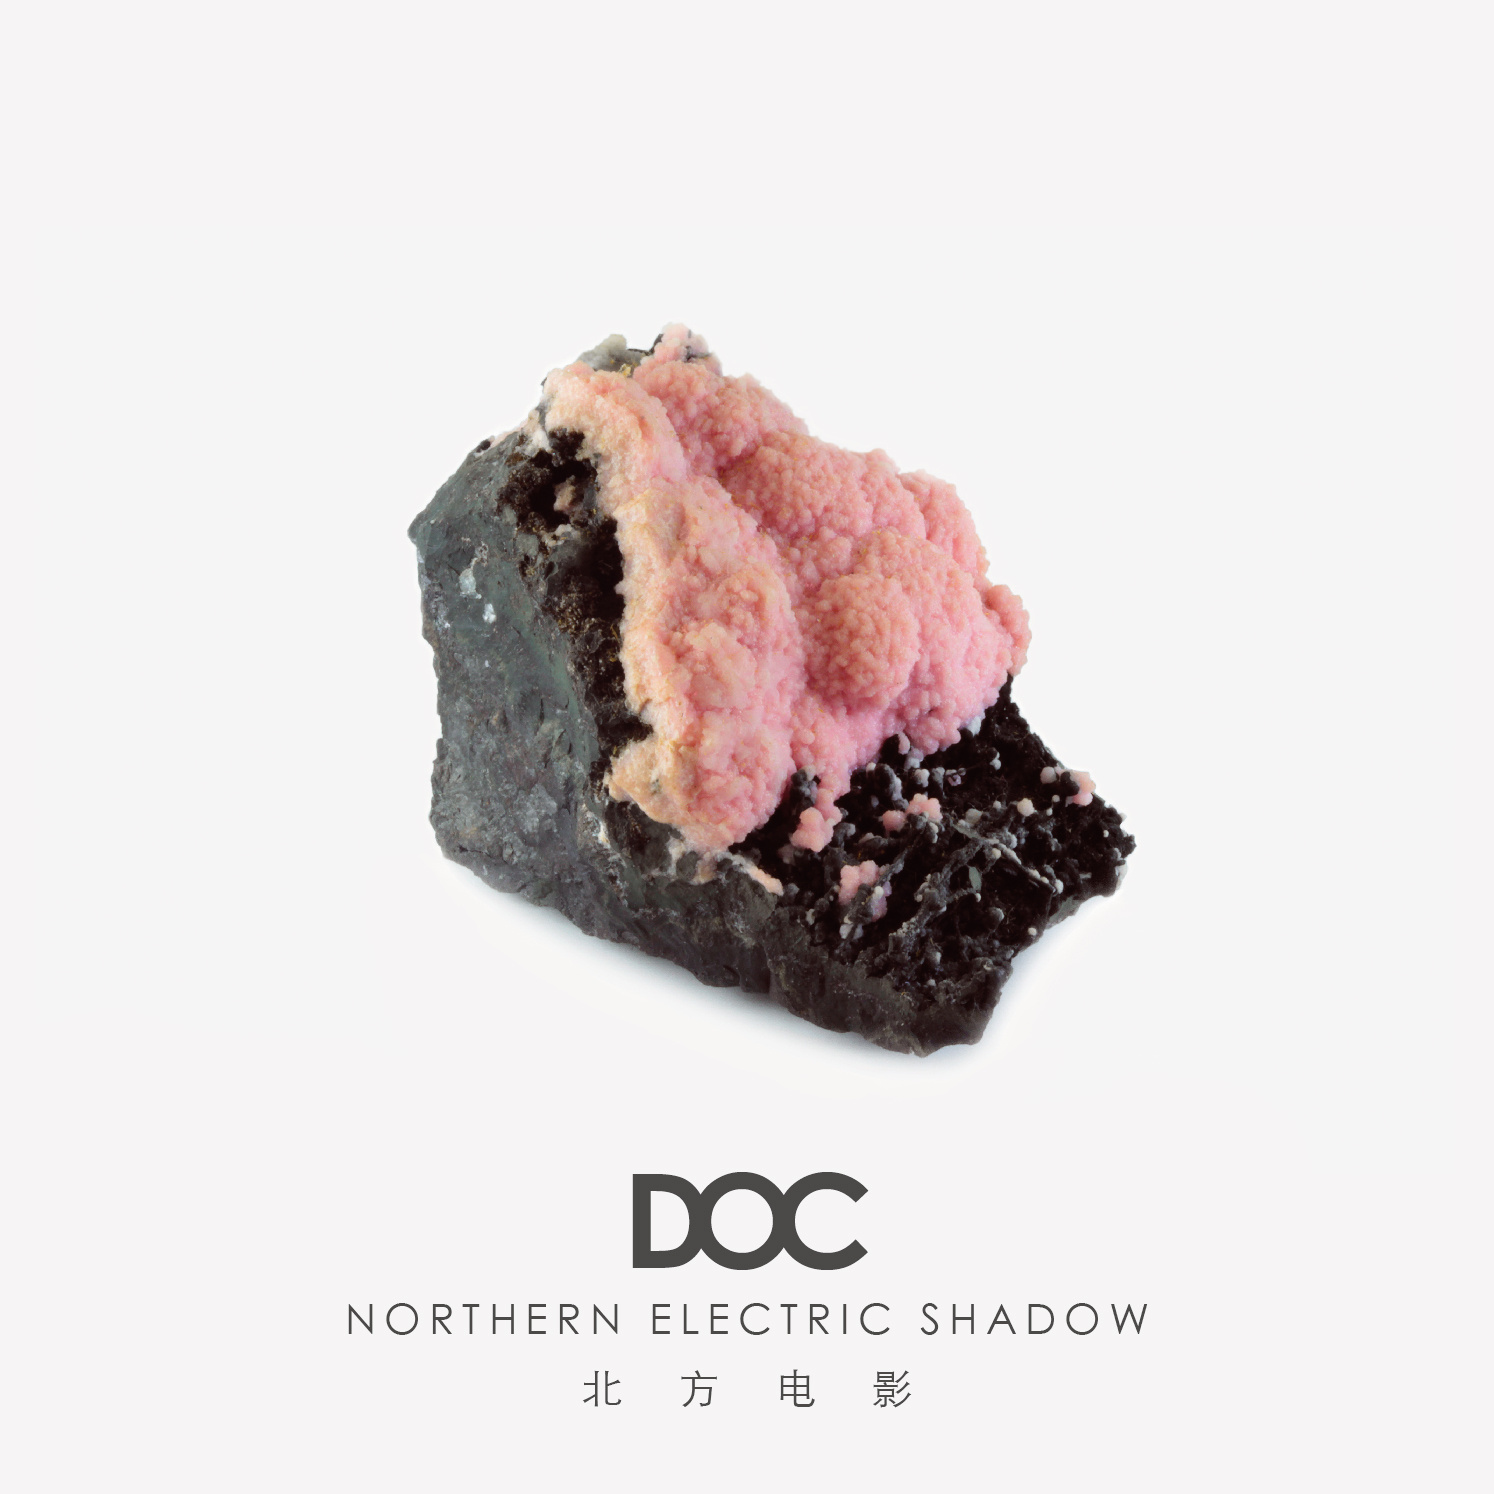 DOC: Northern Electric Shadow